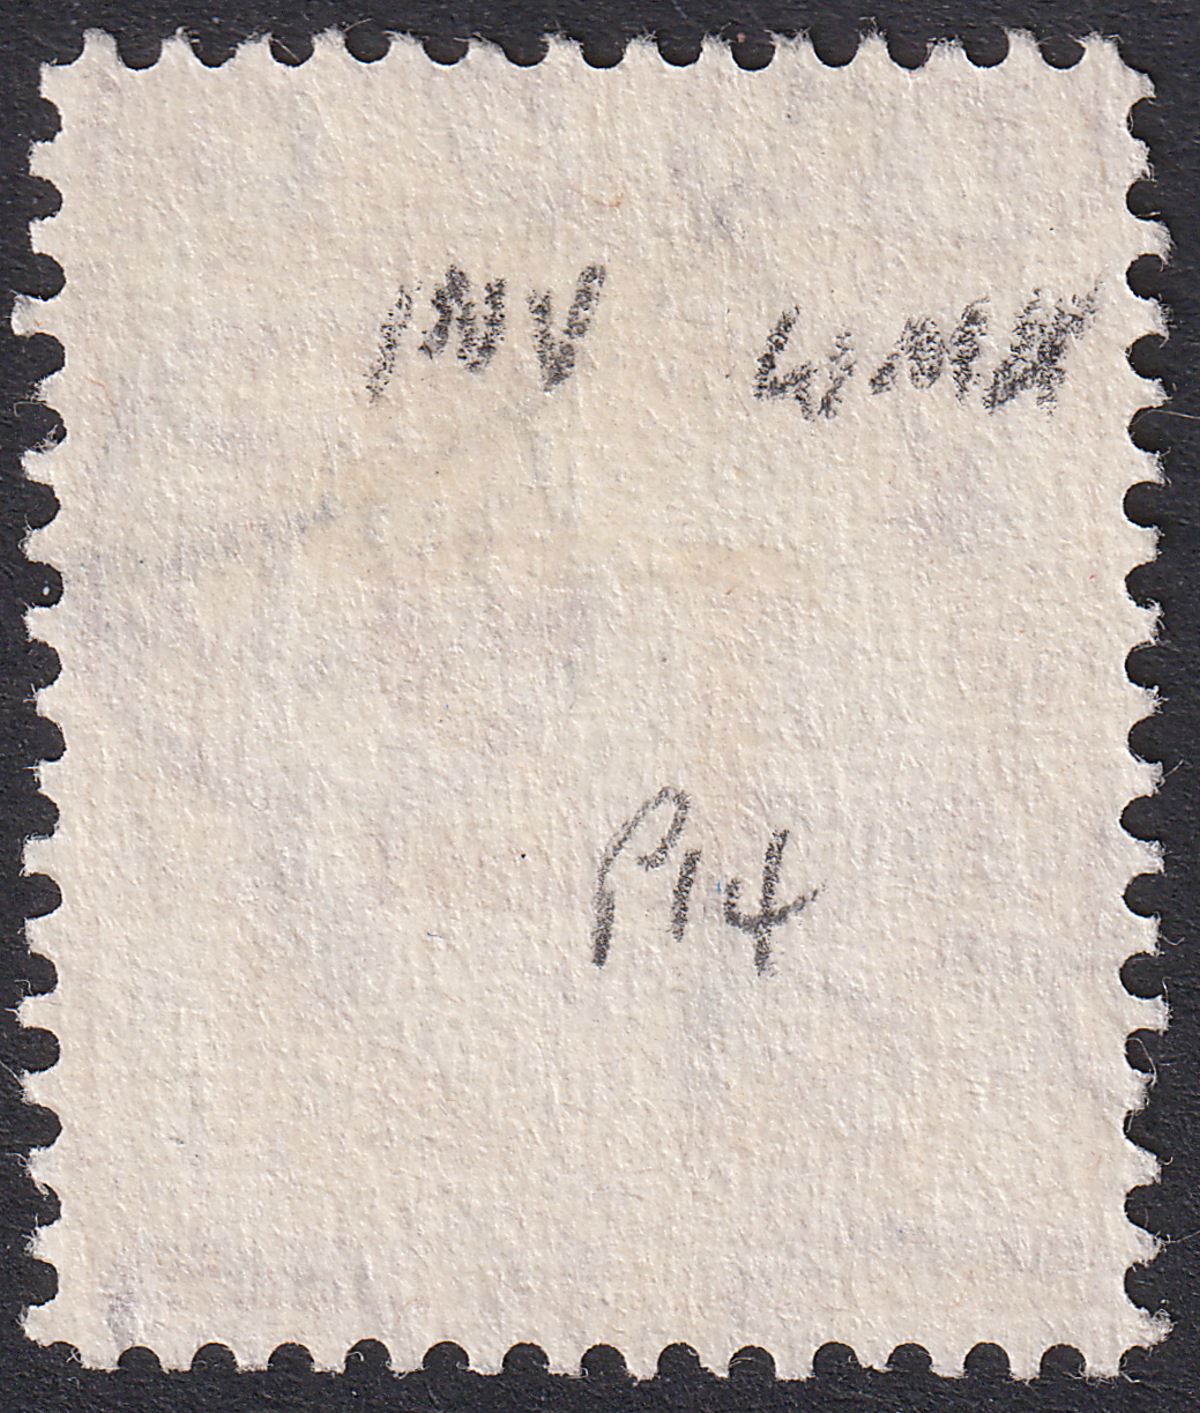 Malayan Postal Union 1954 Postage Due 12c watermark Inverted Used SG D20w